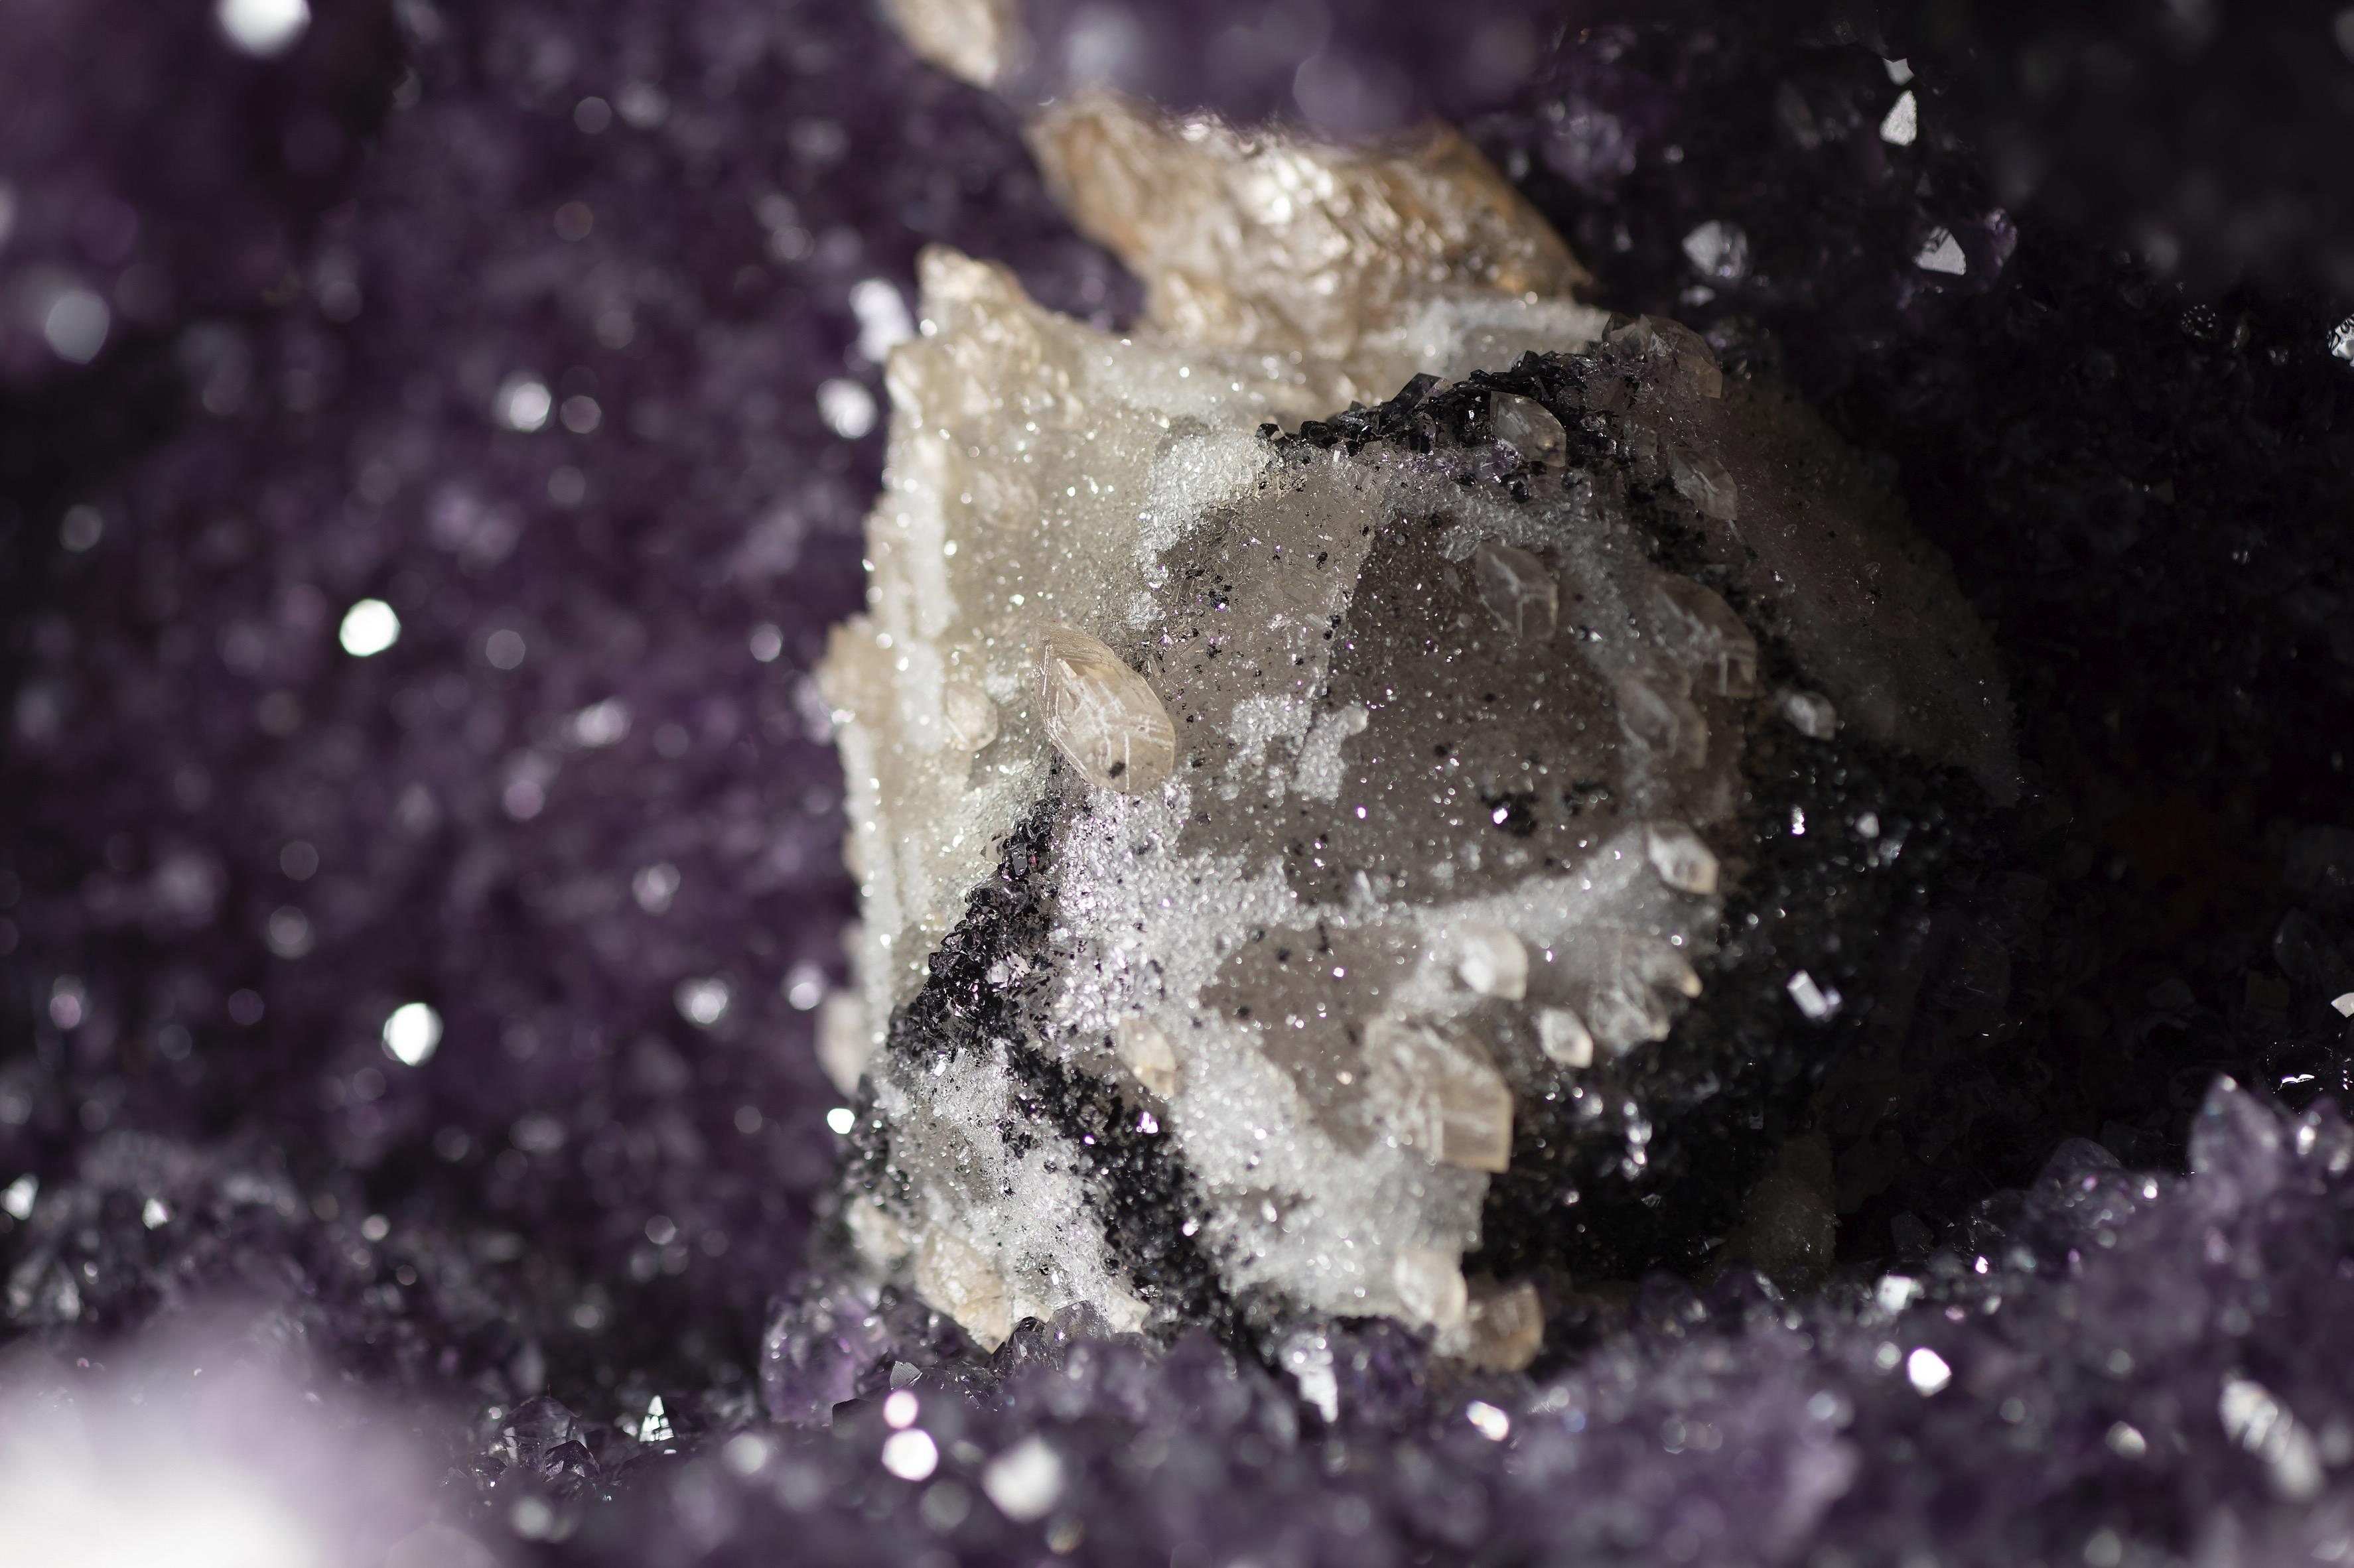 Half Amethyst Geode with Calcite Formation Overlaid by Hematite and White Quartz 2